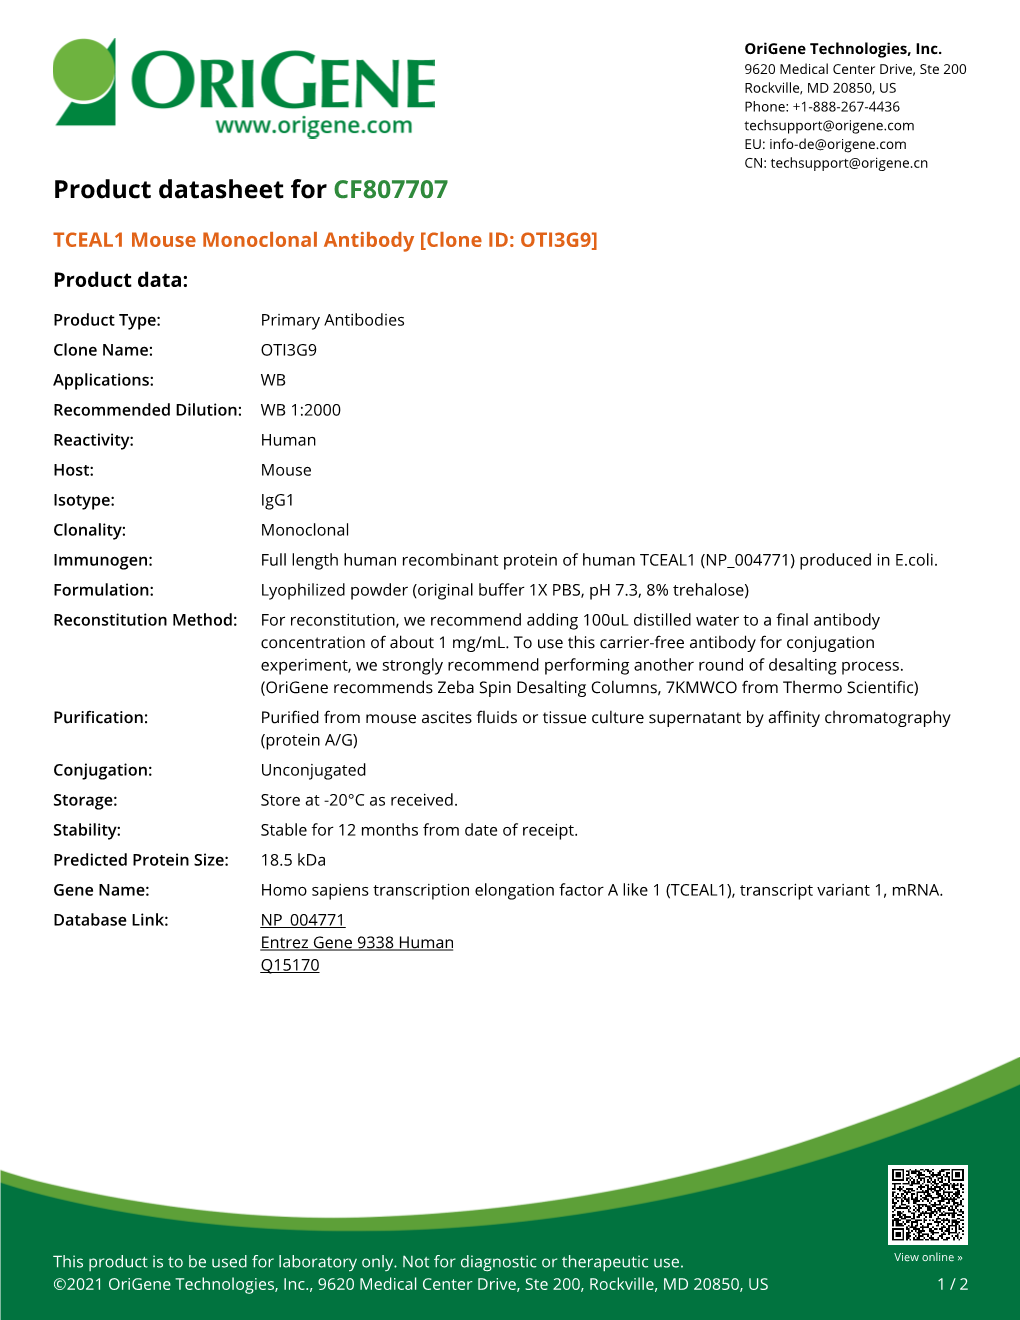 TCEAL1 Mouse Monoclonal Antibody [Clone ID: OTI3G9] Product Data